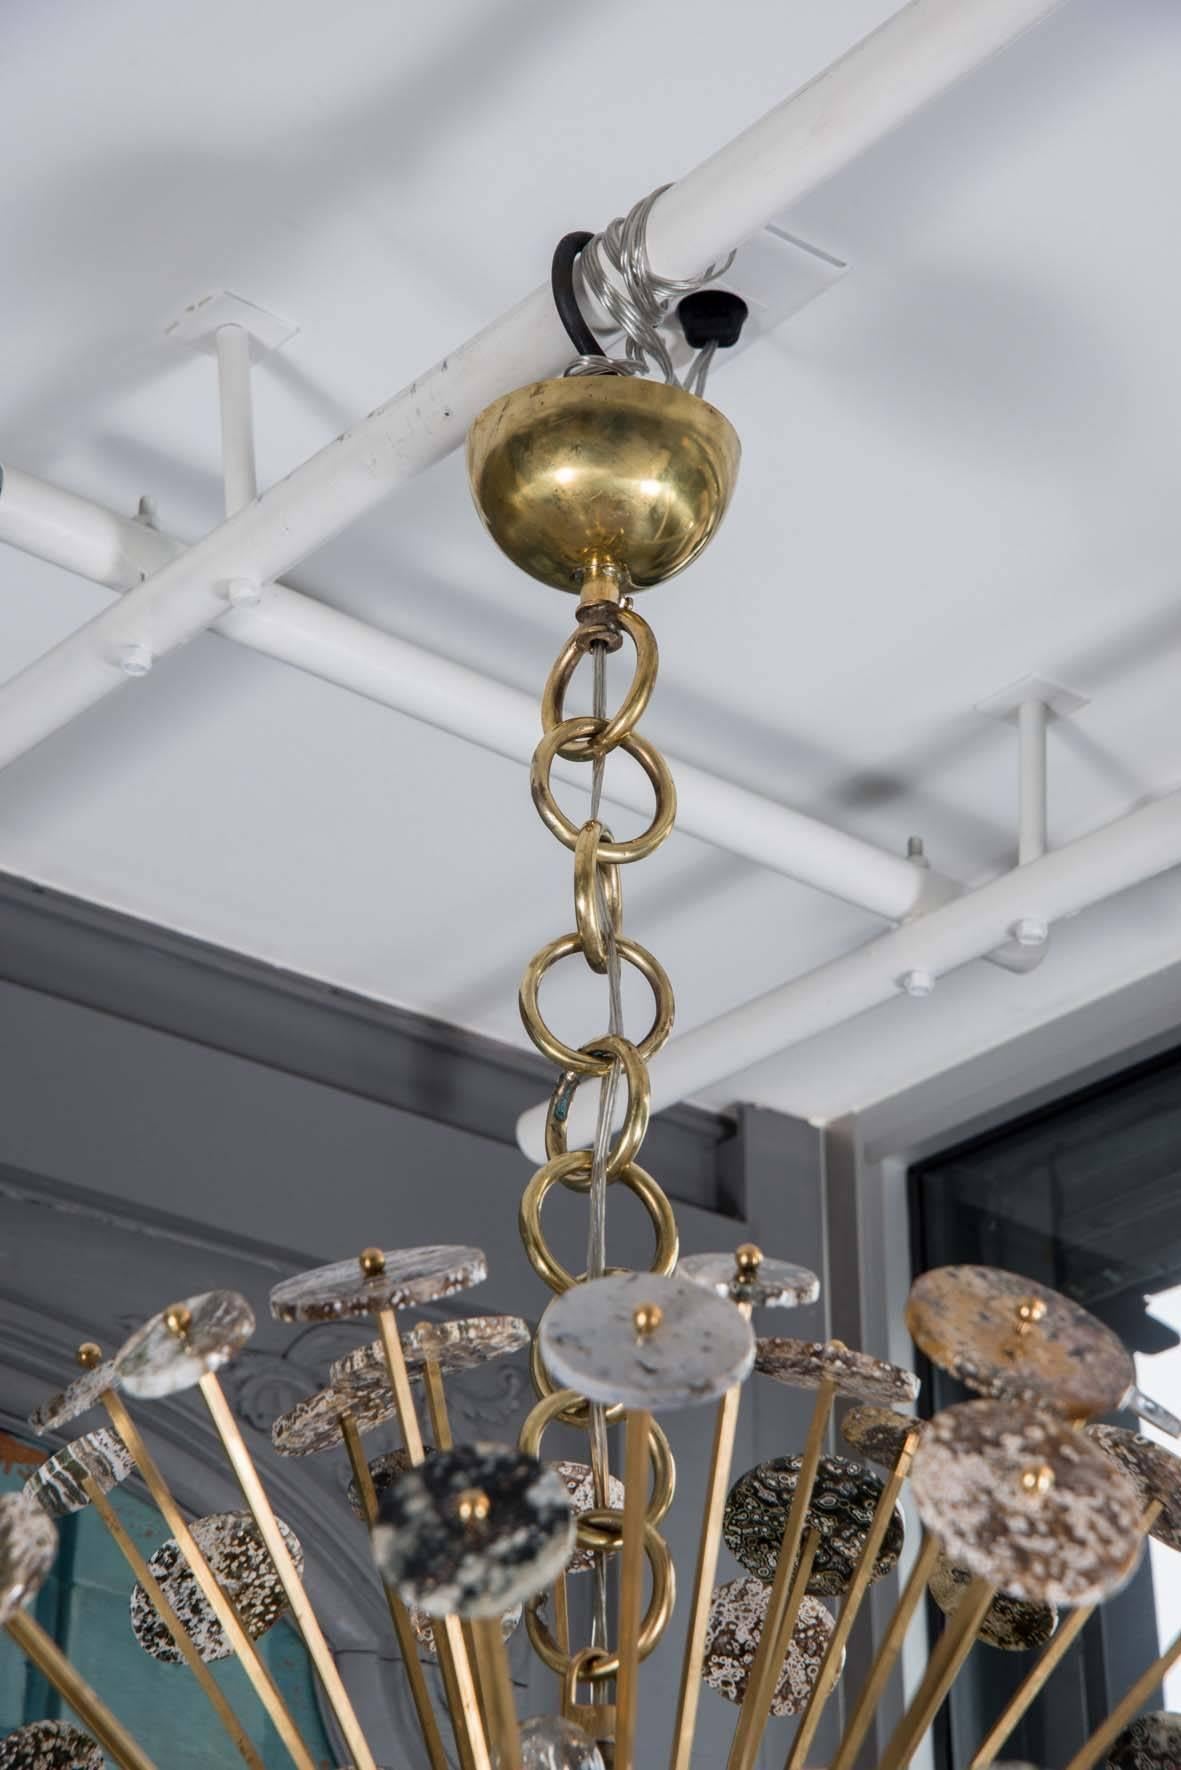 Unique chandelier designed by Glustin Luminaires.

Oval Sputnik shaped chandelier made of brass center and arms decorated by more than on hundred discs of ocean jasper stone.